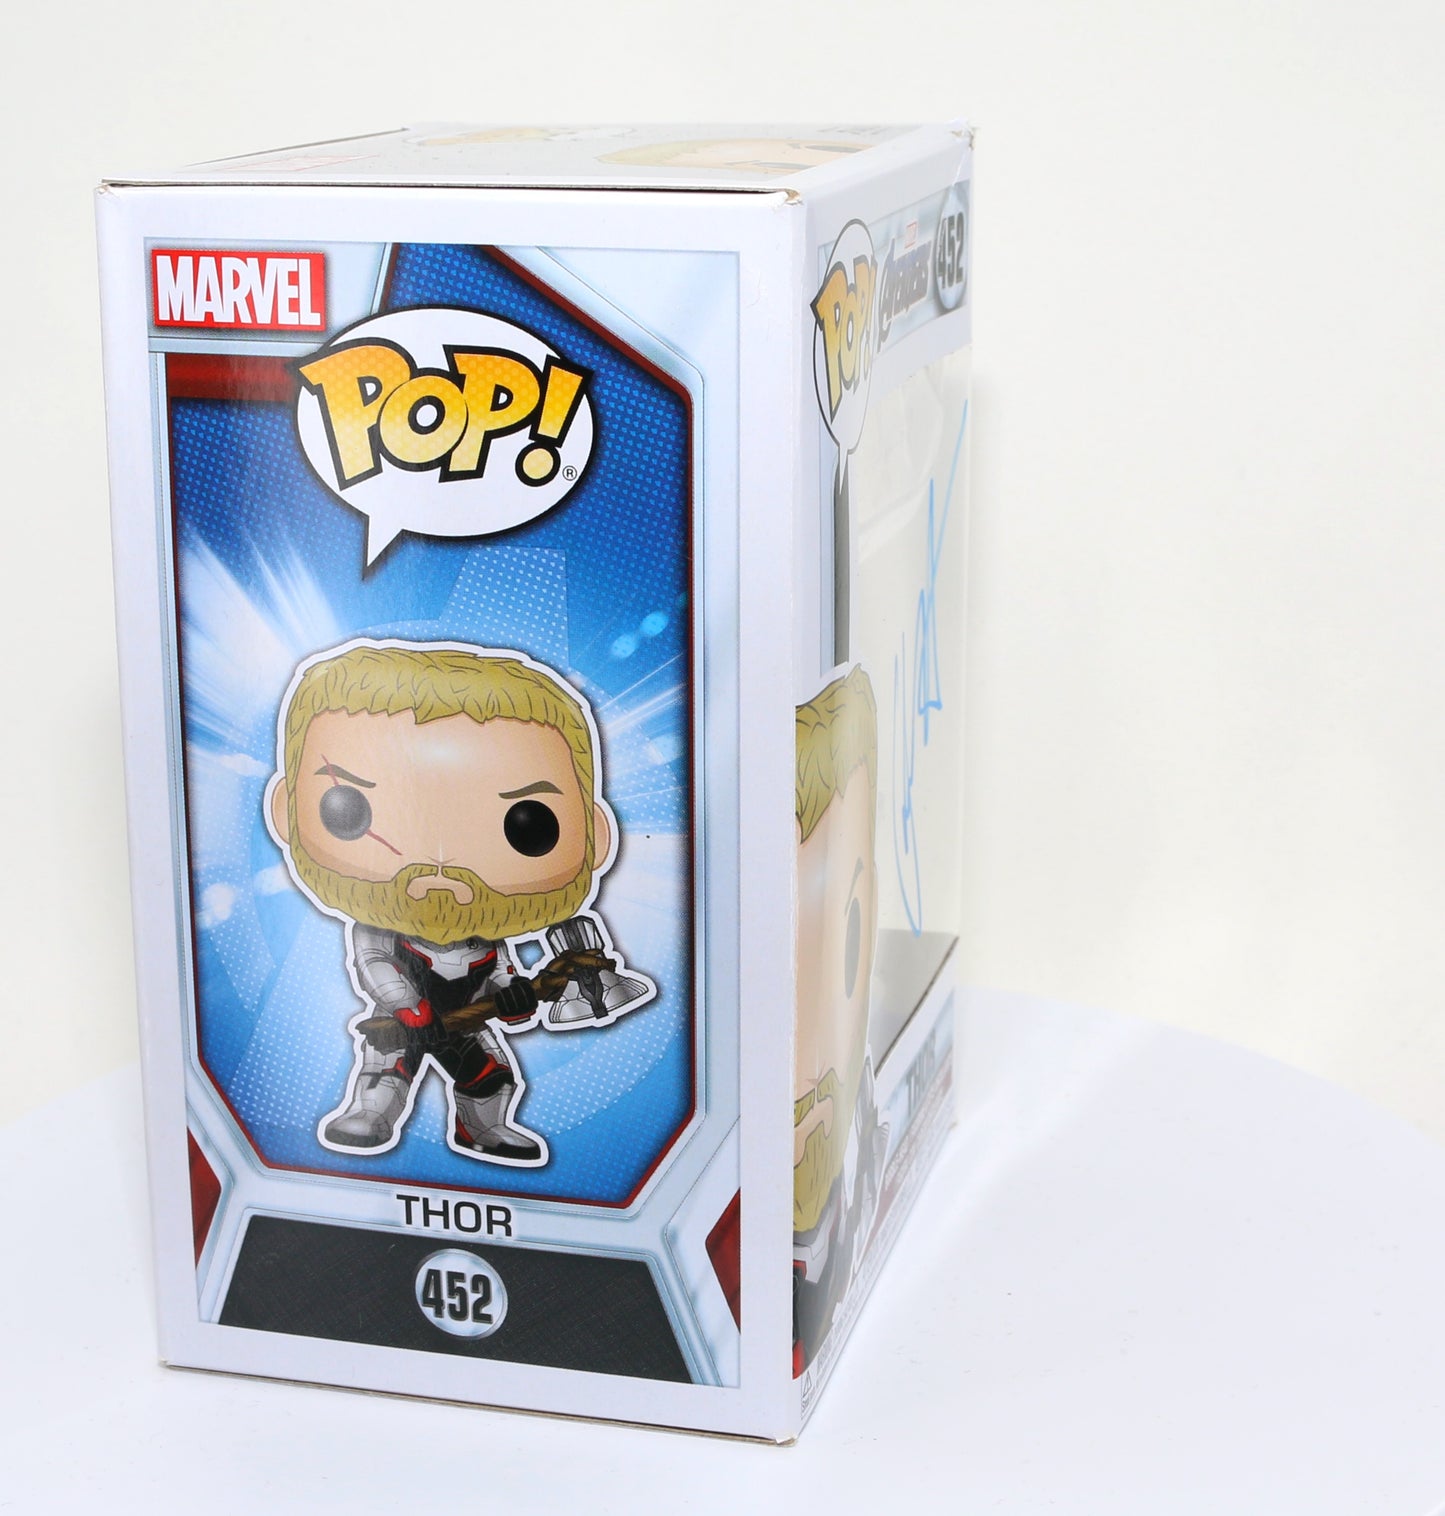 
                  
                    Chris Hemsworth as Thor in Avengers: Endgame (SWAU Authenticated) Signed POP! Funko #452
                  
                